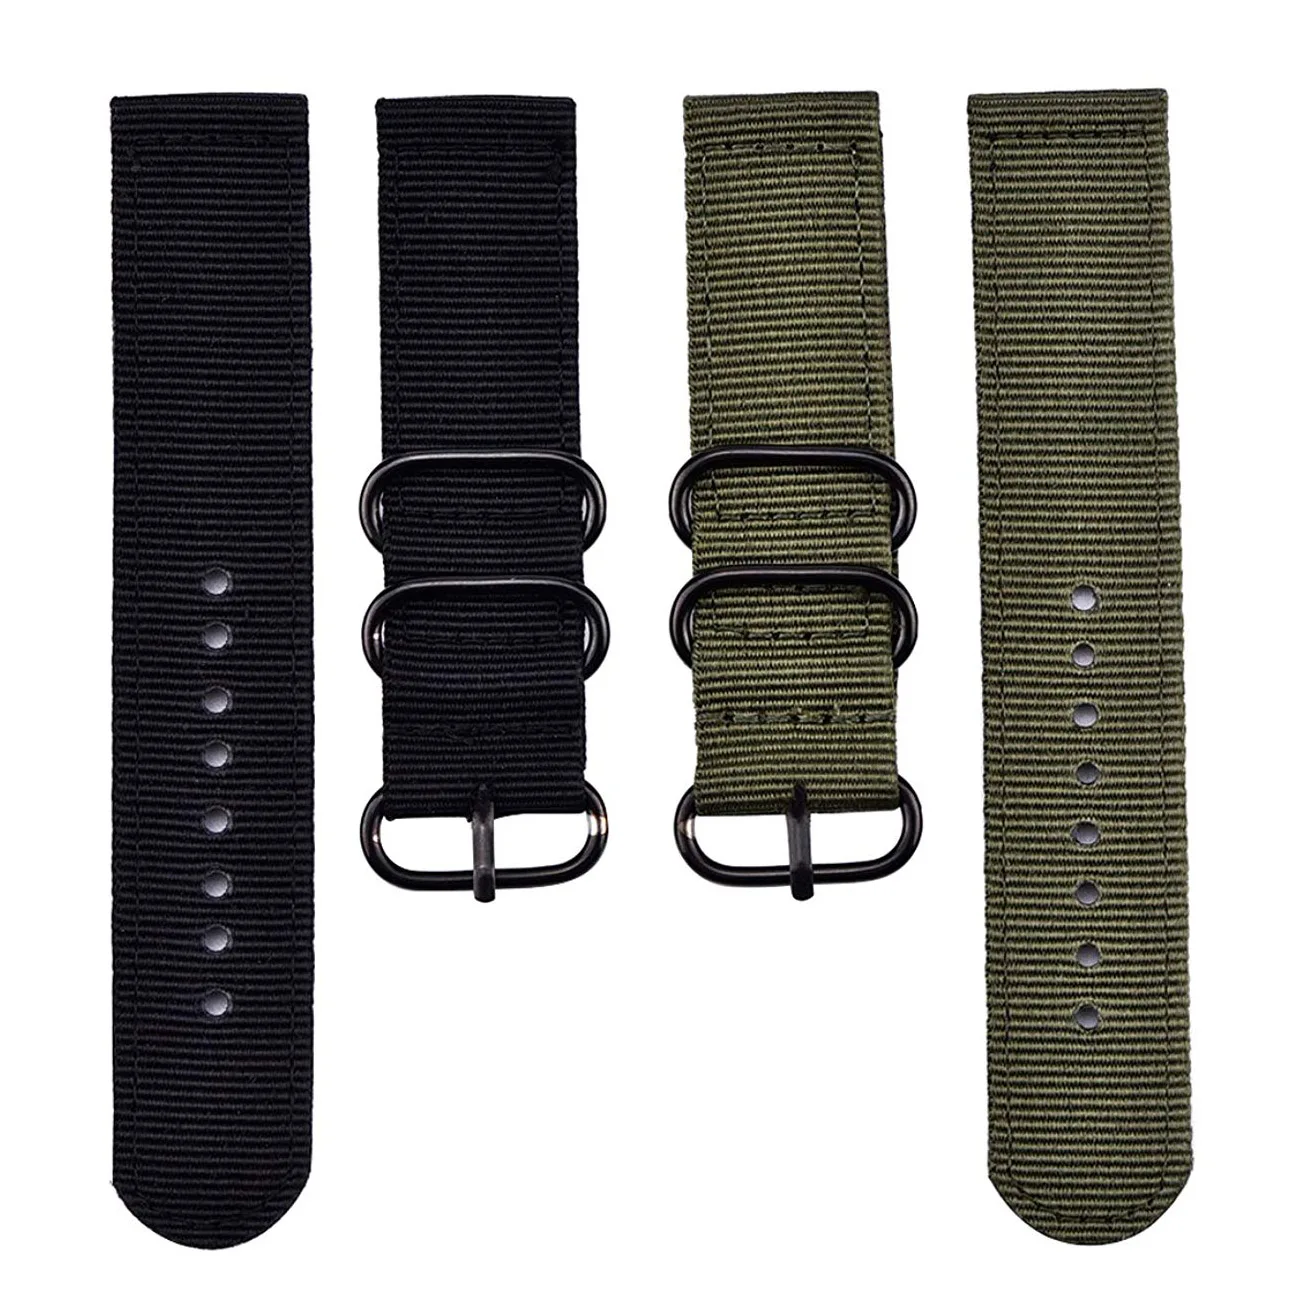 18mm 24mm 22mm 20mm Woven Nylon Watch Sport Strap Band For Samsung Galaxy Gear S3 S2 Classic Bands for Amazfit Fabric band images - 6